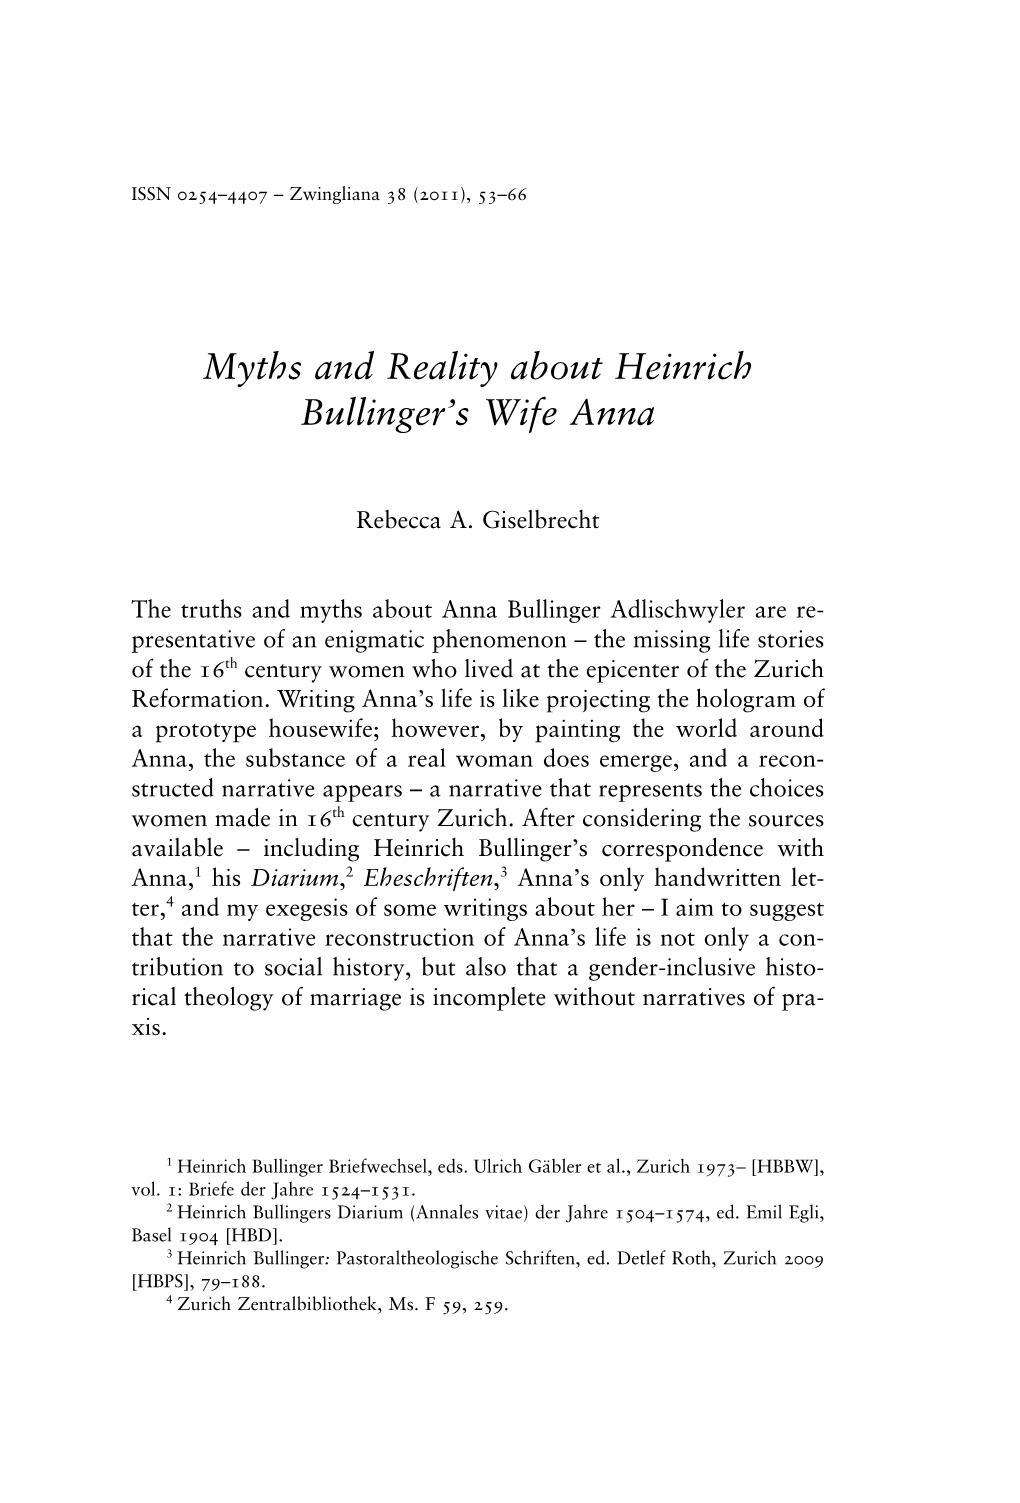 Myths and Reality About Heinrich Bullinger's Wife Anna